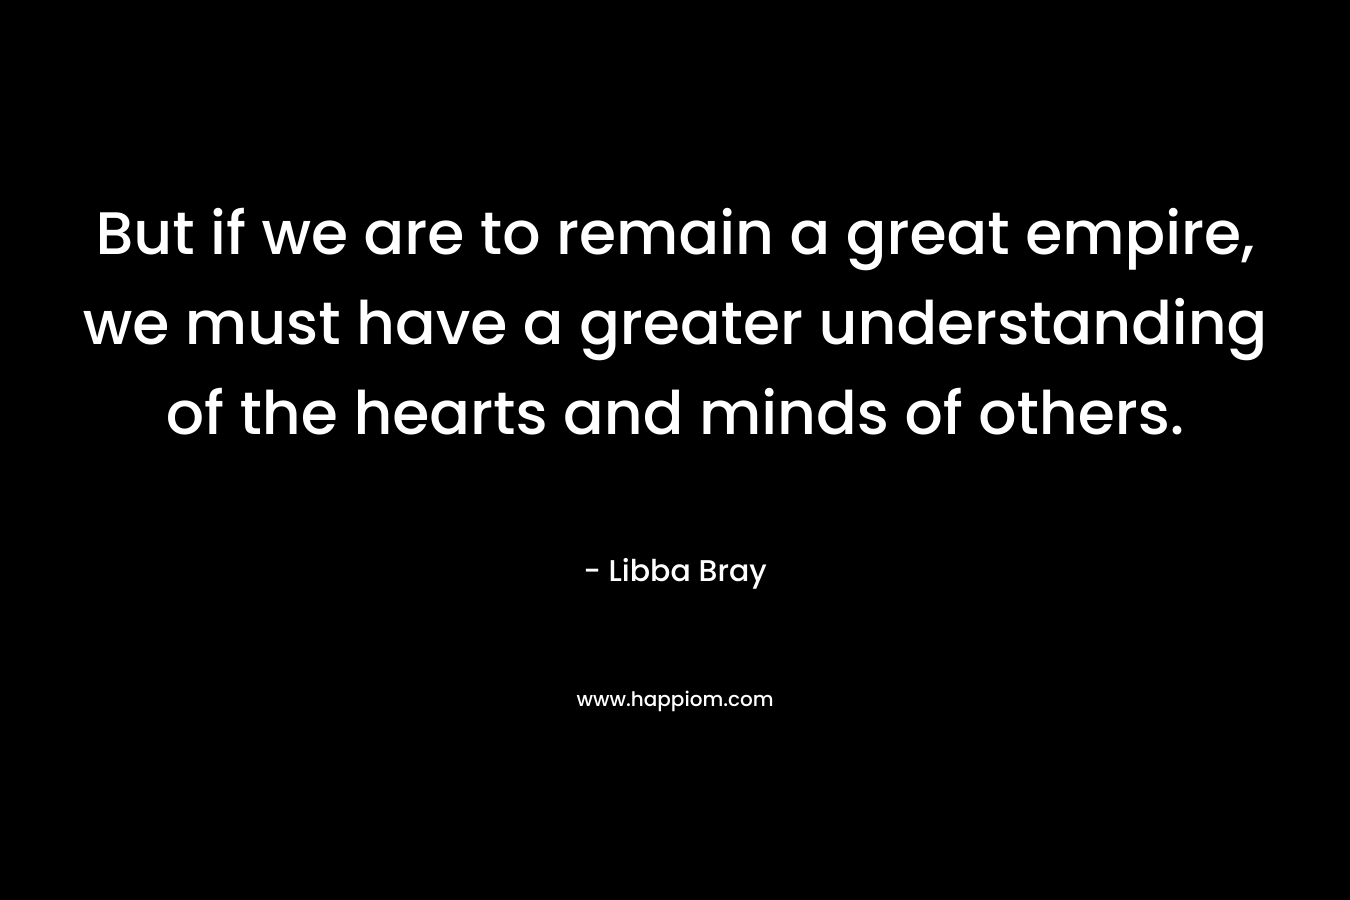 But if we are to remain a great empire, we must have a greater understanding of the hearts and minds of others. – Libba Bray